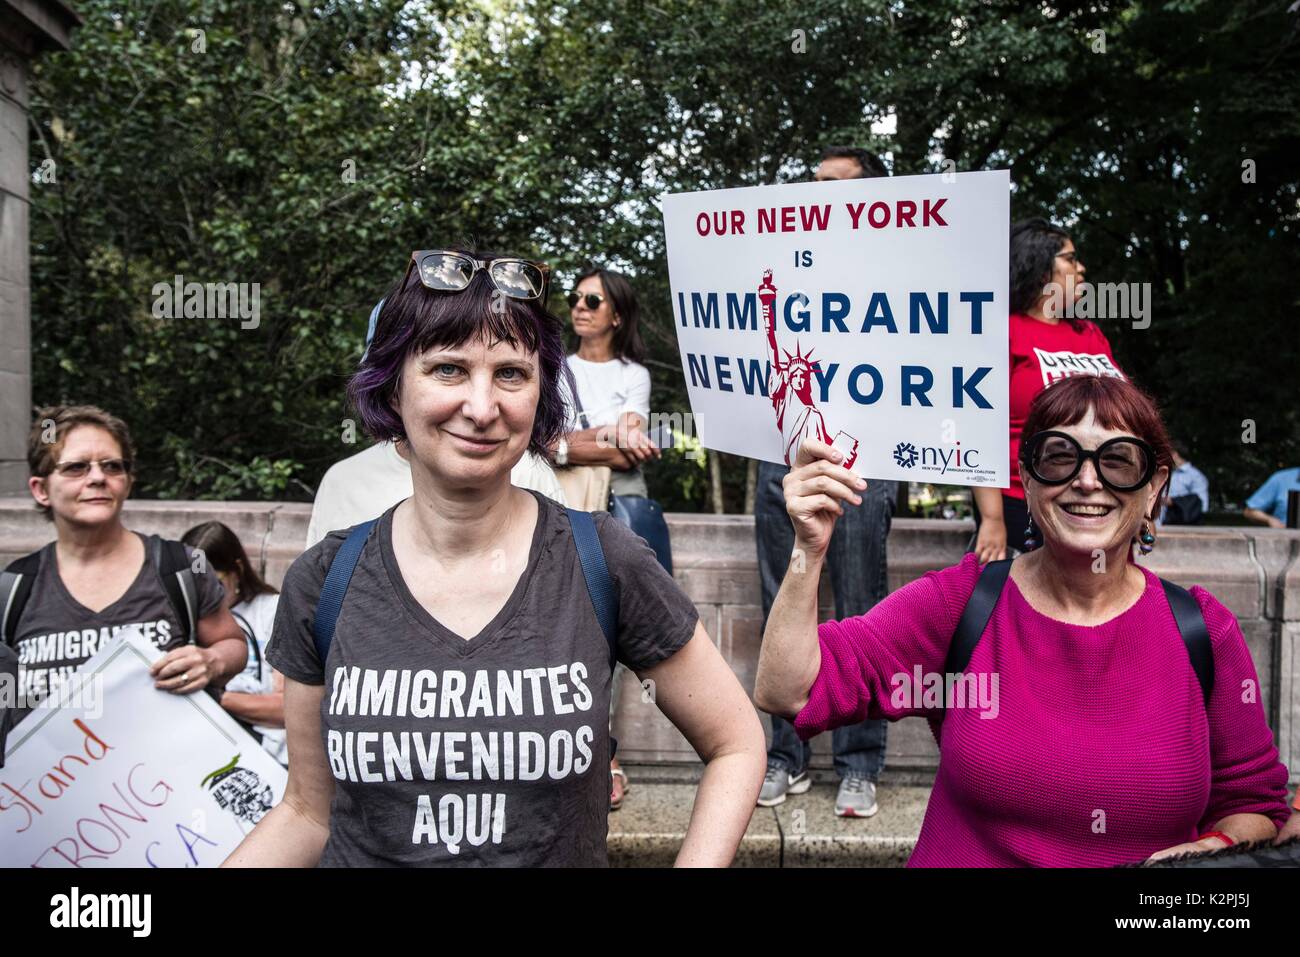 New York City, New York, USA. 30th Aug, 2017. Due to the review of the DACA Act (DEFERRED ACTION FOR CHILDHOOD ARRIVALS) by the Trump Administration, as well as expectation of the discontinuation of the program, 1,500 New Yorkers gathered at the Trump International Hotel and Tower to demonstrate their support for the act. The DACA Act gives protection against deportation to undocumented young people under 31 years of age, so long as they fulfill certain requirements. Furthermore, the act allows them to attend schools and obtain work permits. The Trump Administration Stock Photo